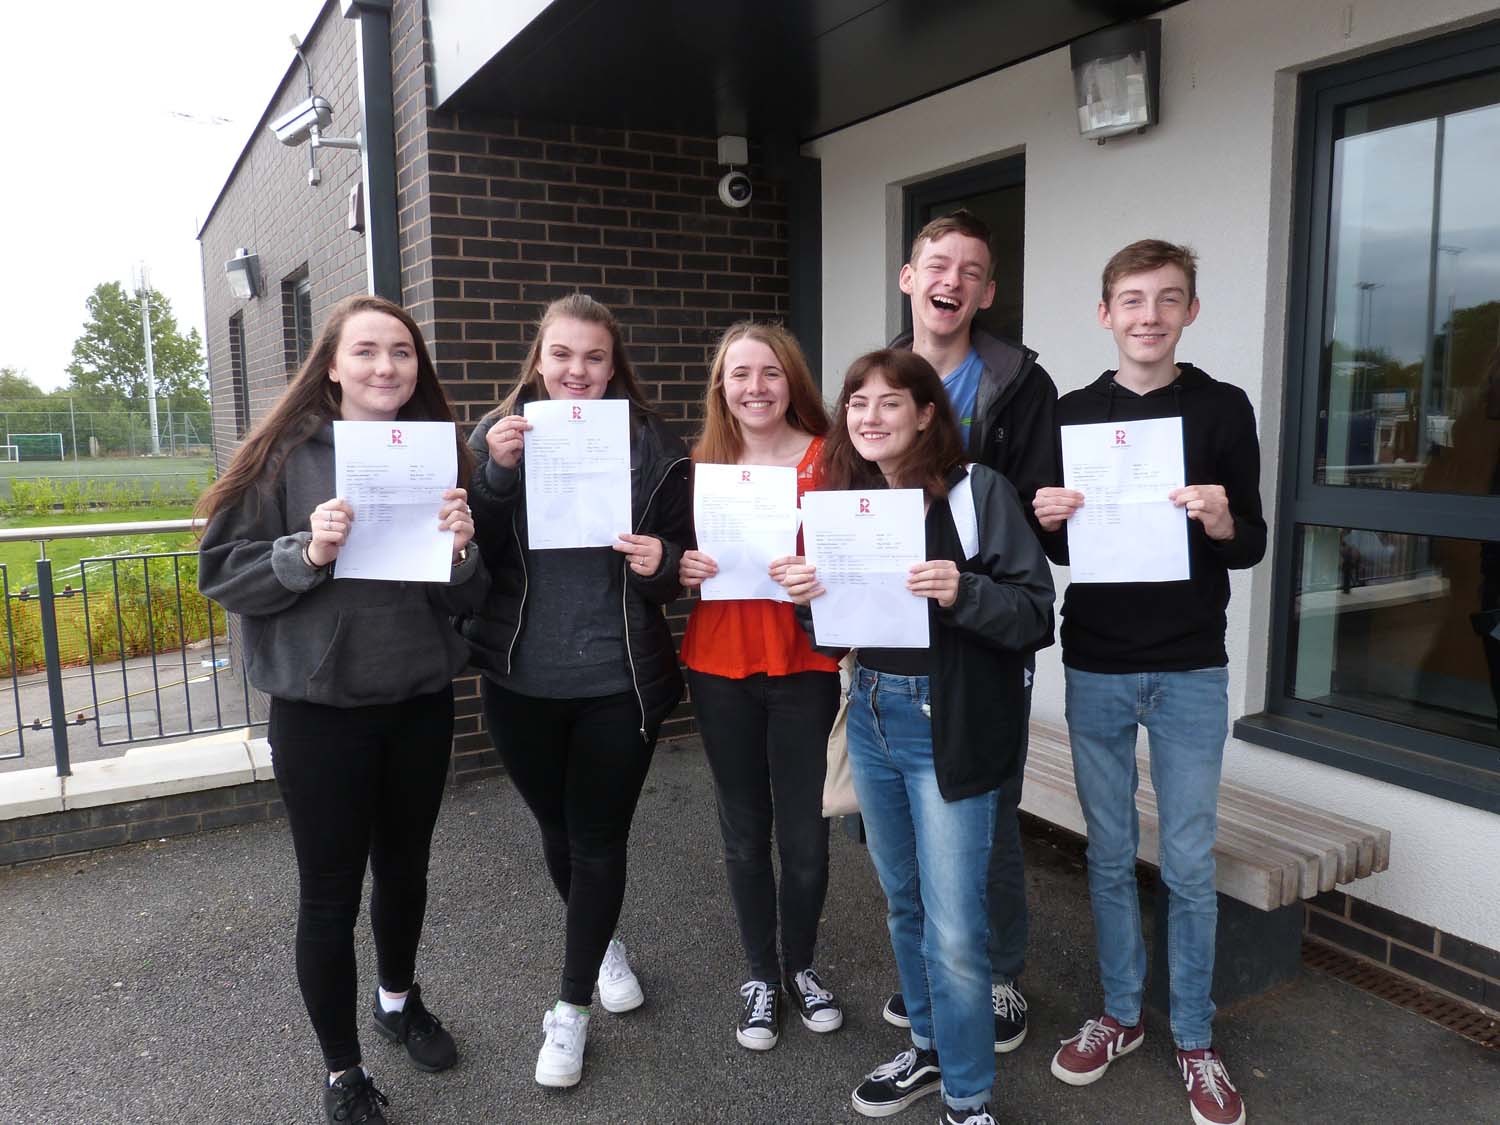 Lara Henderson, Catrina Wardman, Eleanor Clements-Wragg, Olivia Gartshore, Jack Moran and Thomas Hawkins all passed their exams, including numerous high grades between them, and will be beginning A levels and other further education courses in September